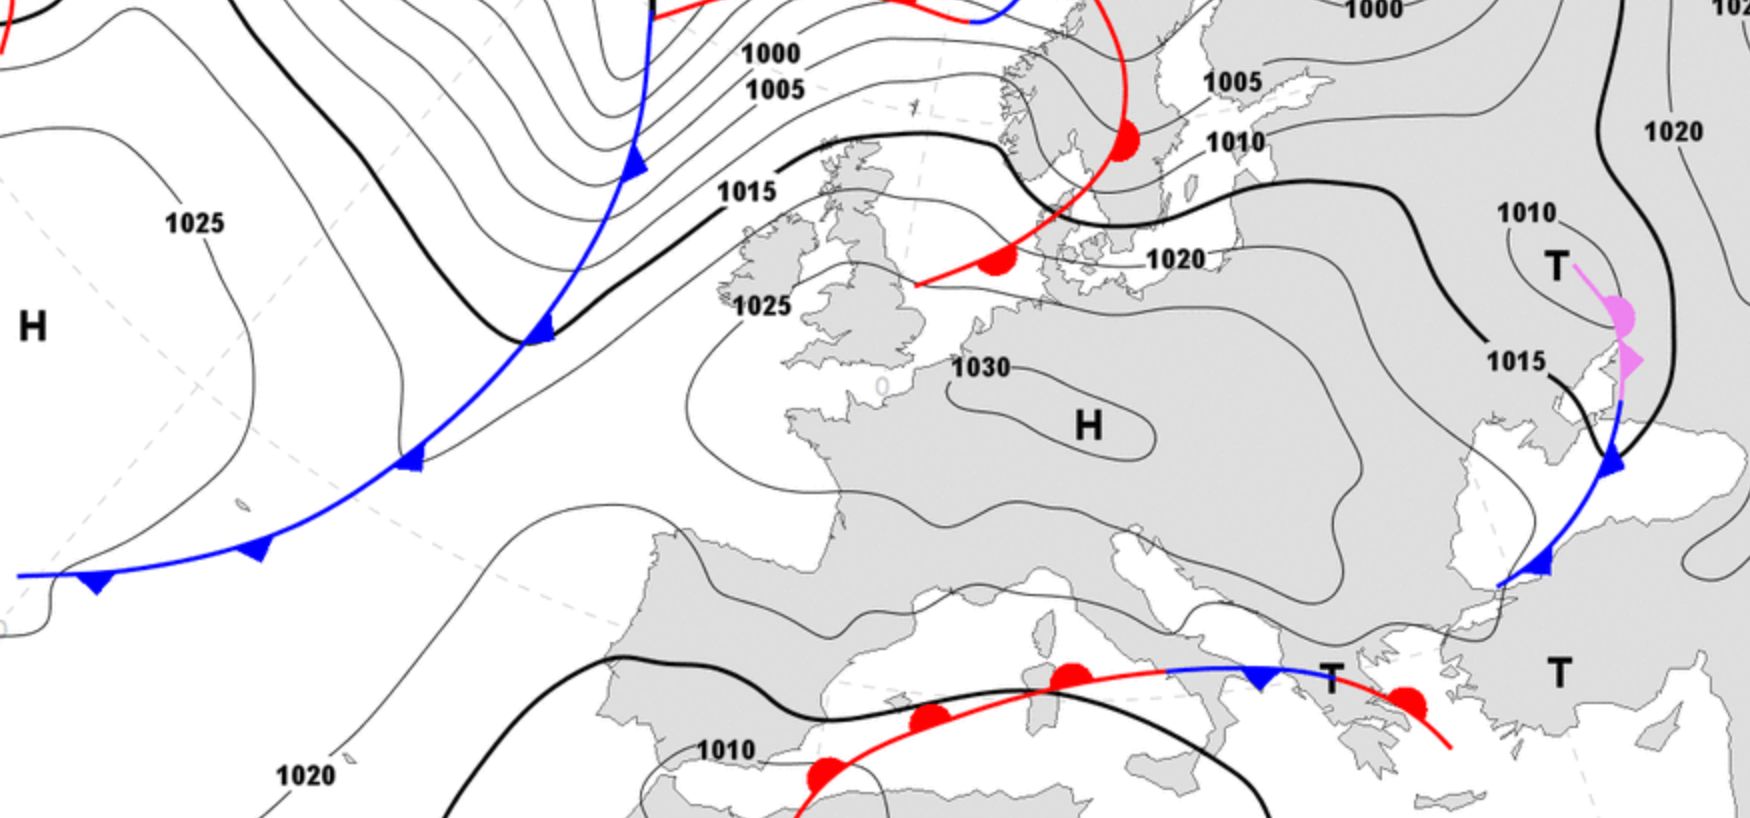 High pressure north of the Alps